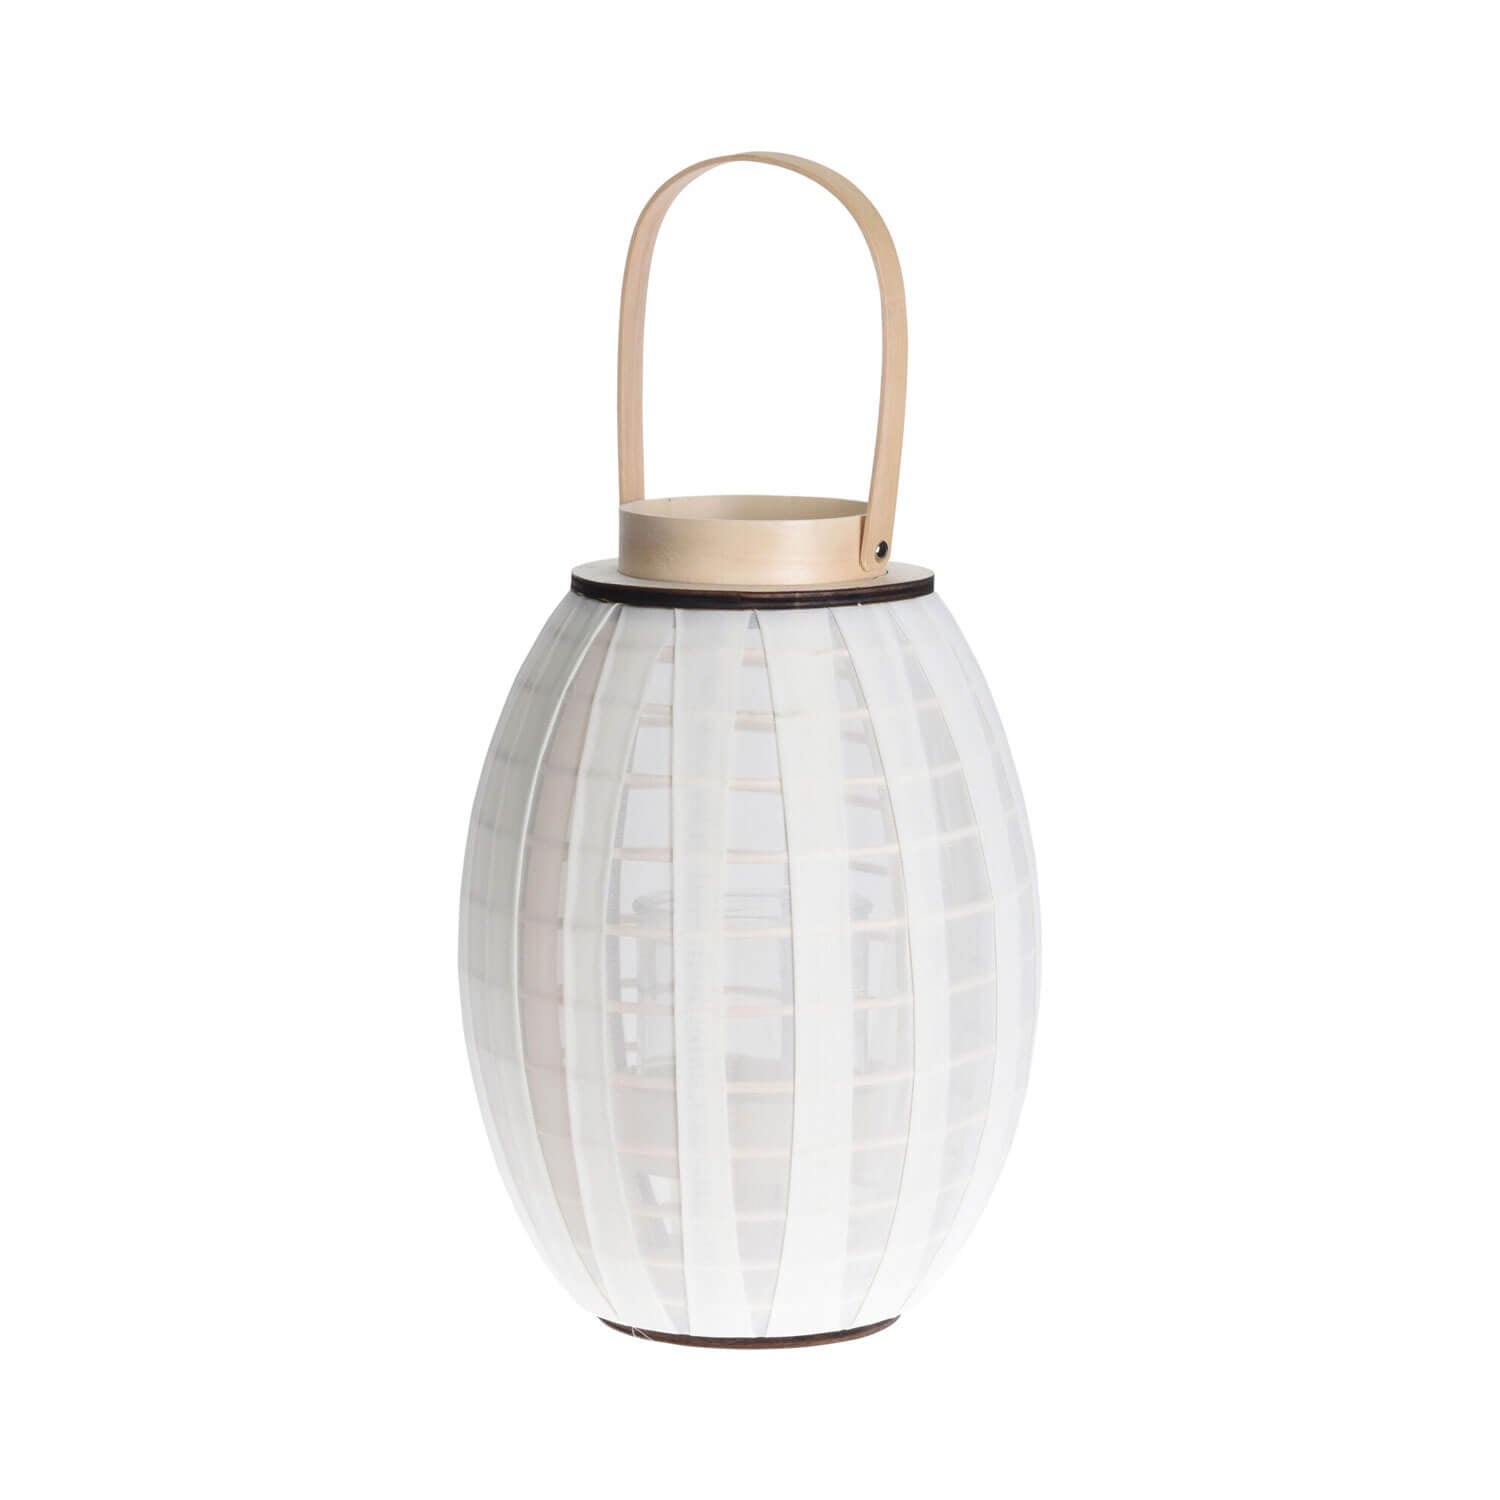 The Home Collection Lantern 1 Shaws Department Stores